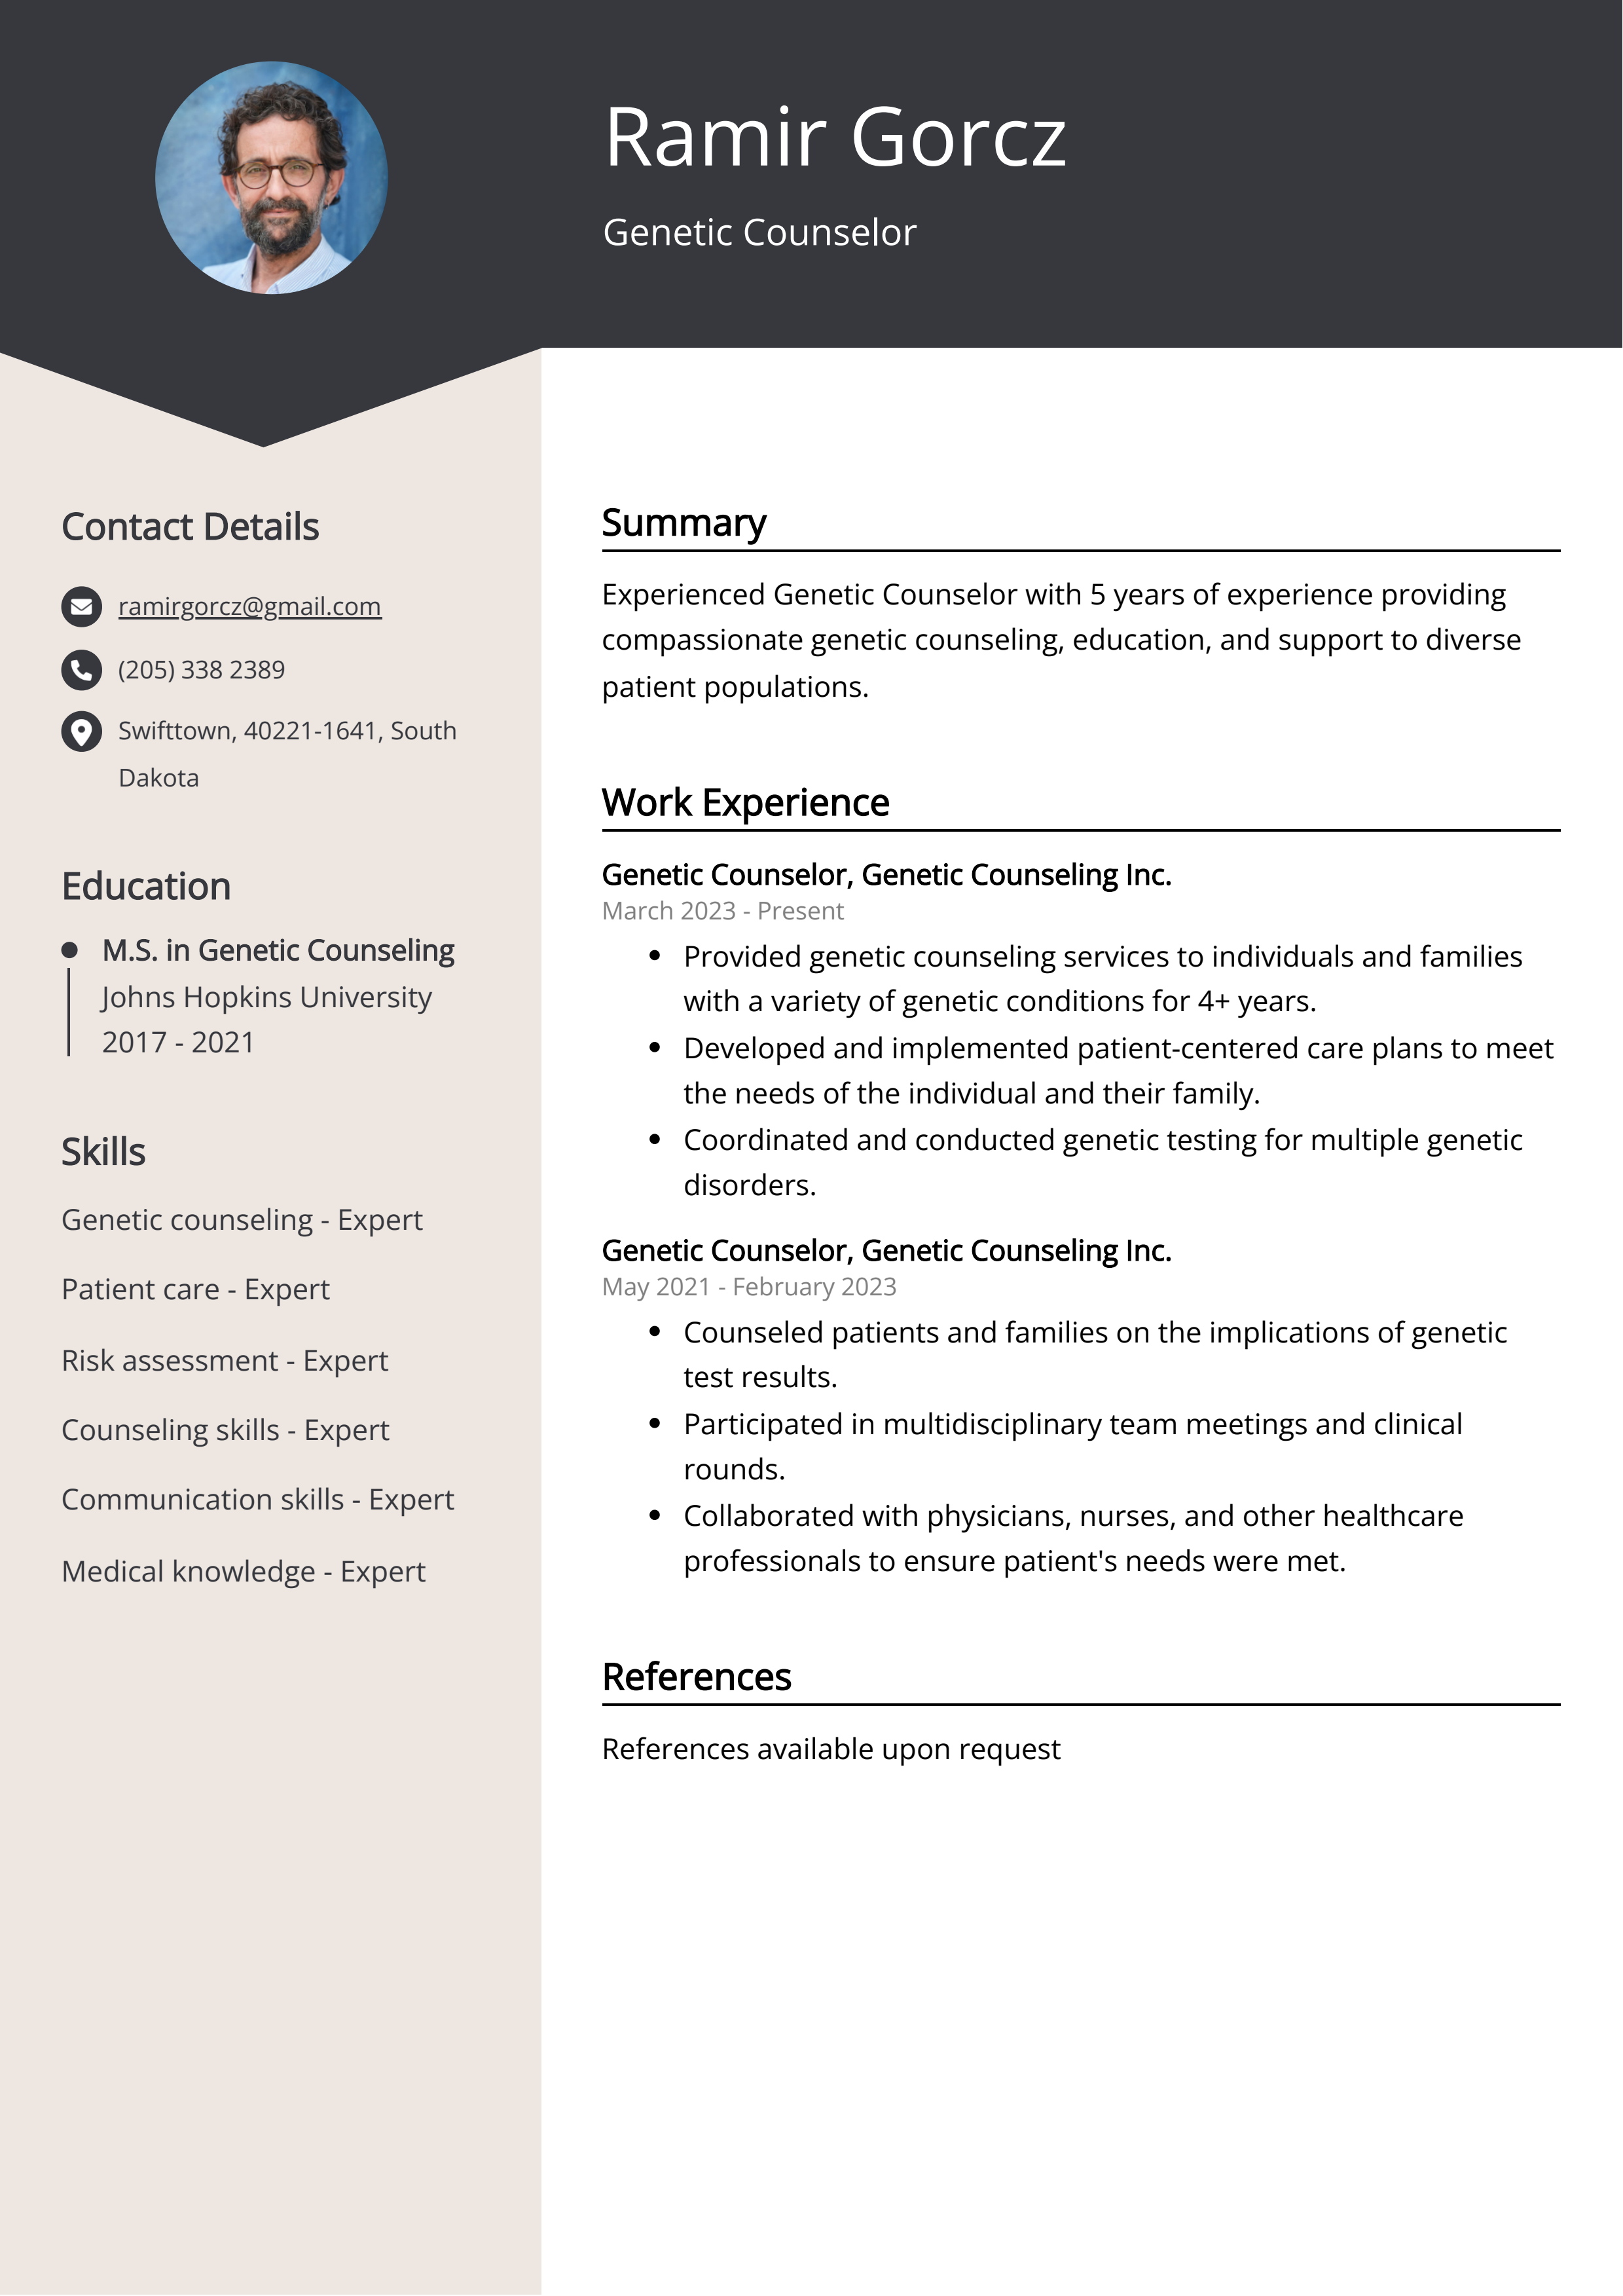 Genetic Counselor CV Example